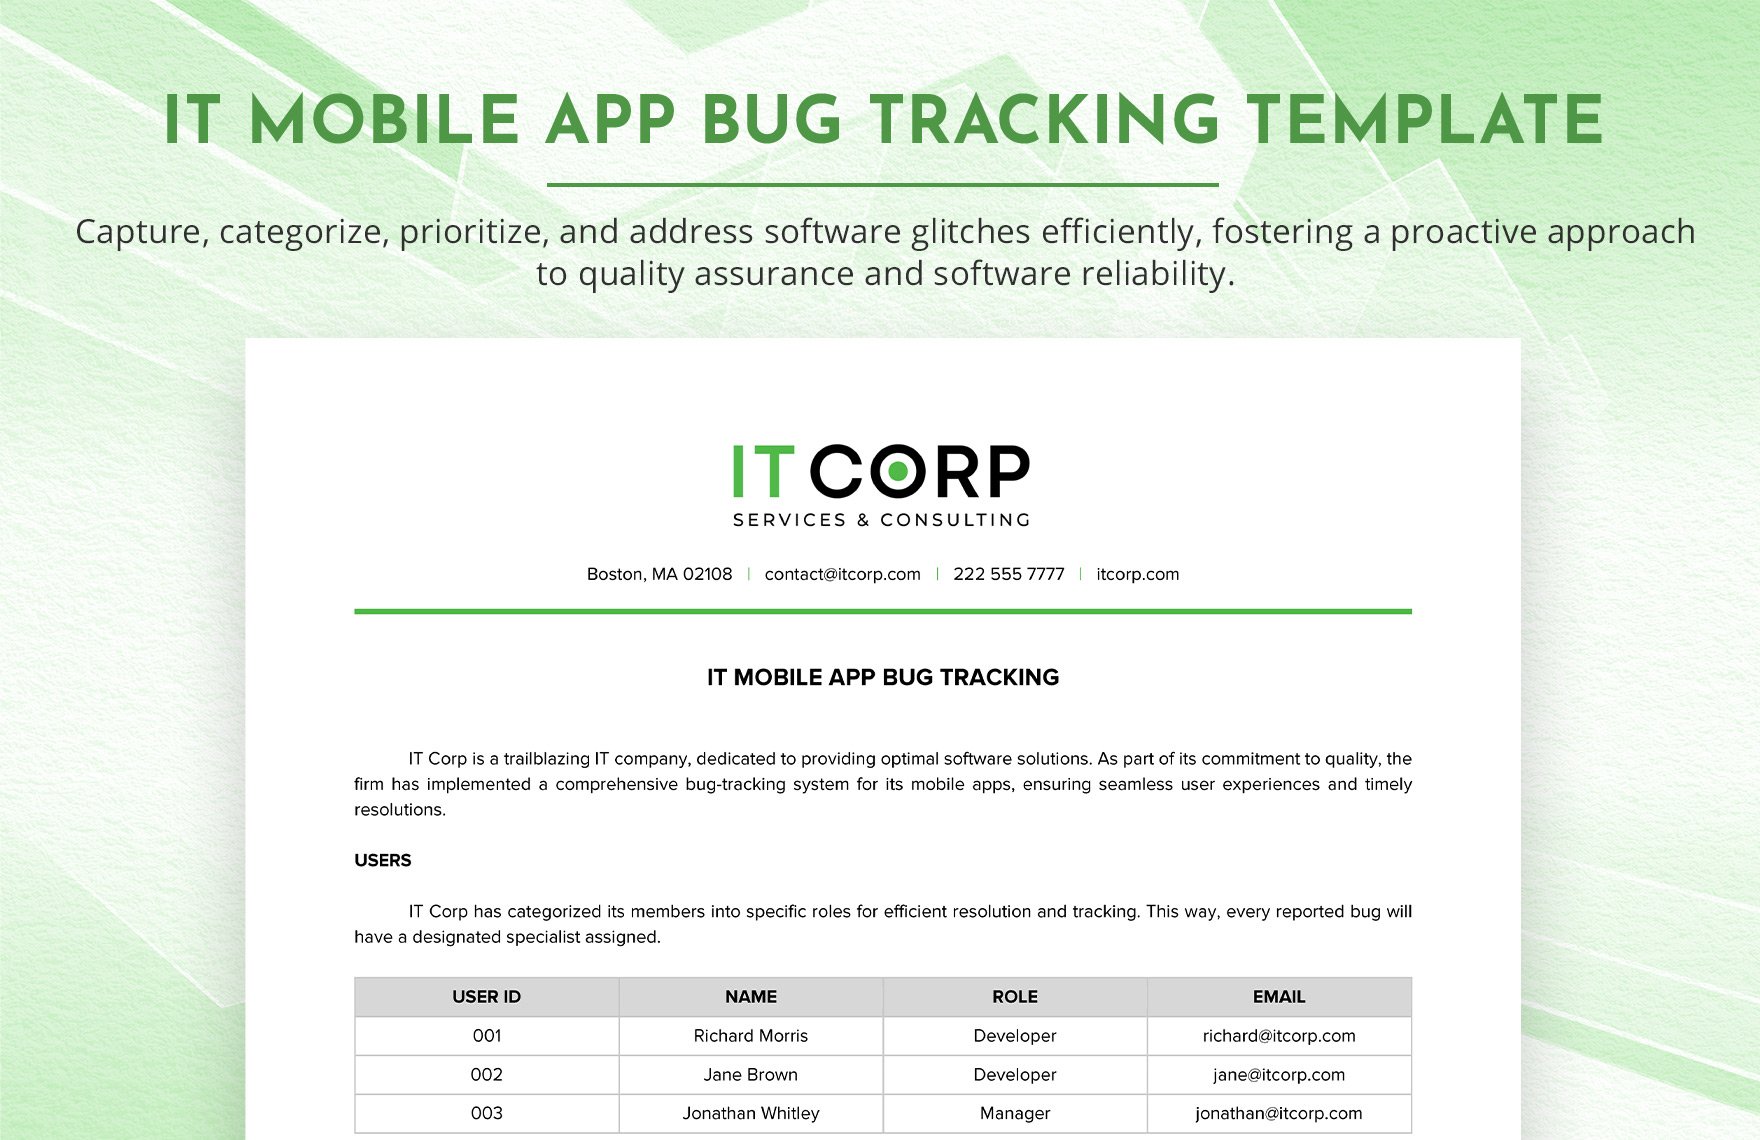 IT Mobile App Bug Tracking Template in Word, Google Docs, PDF